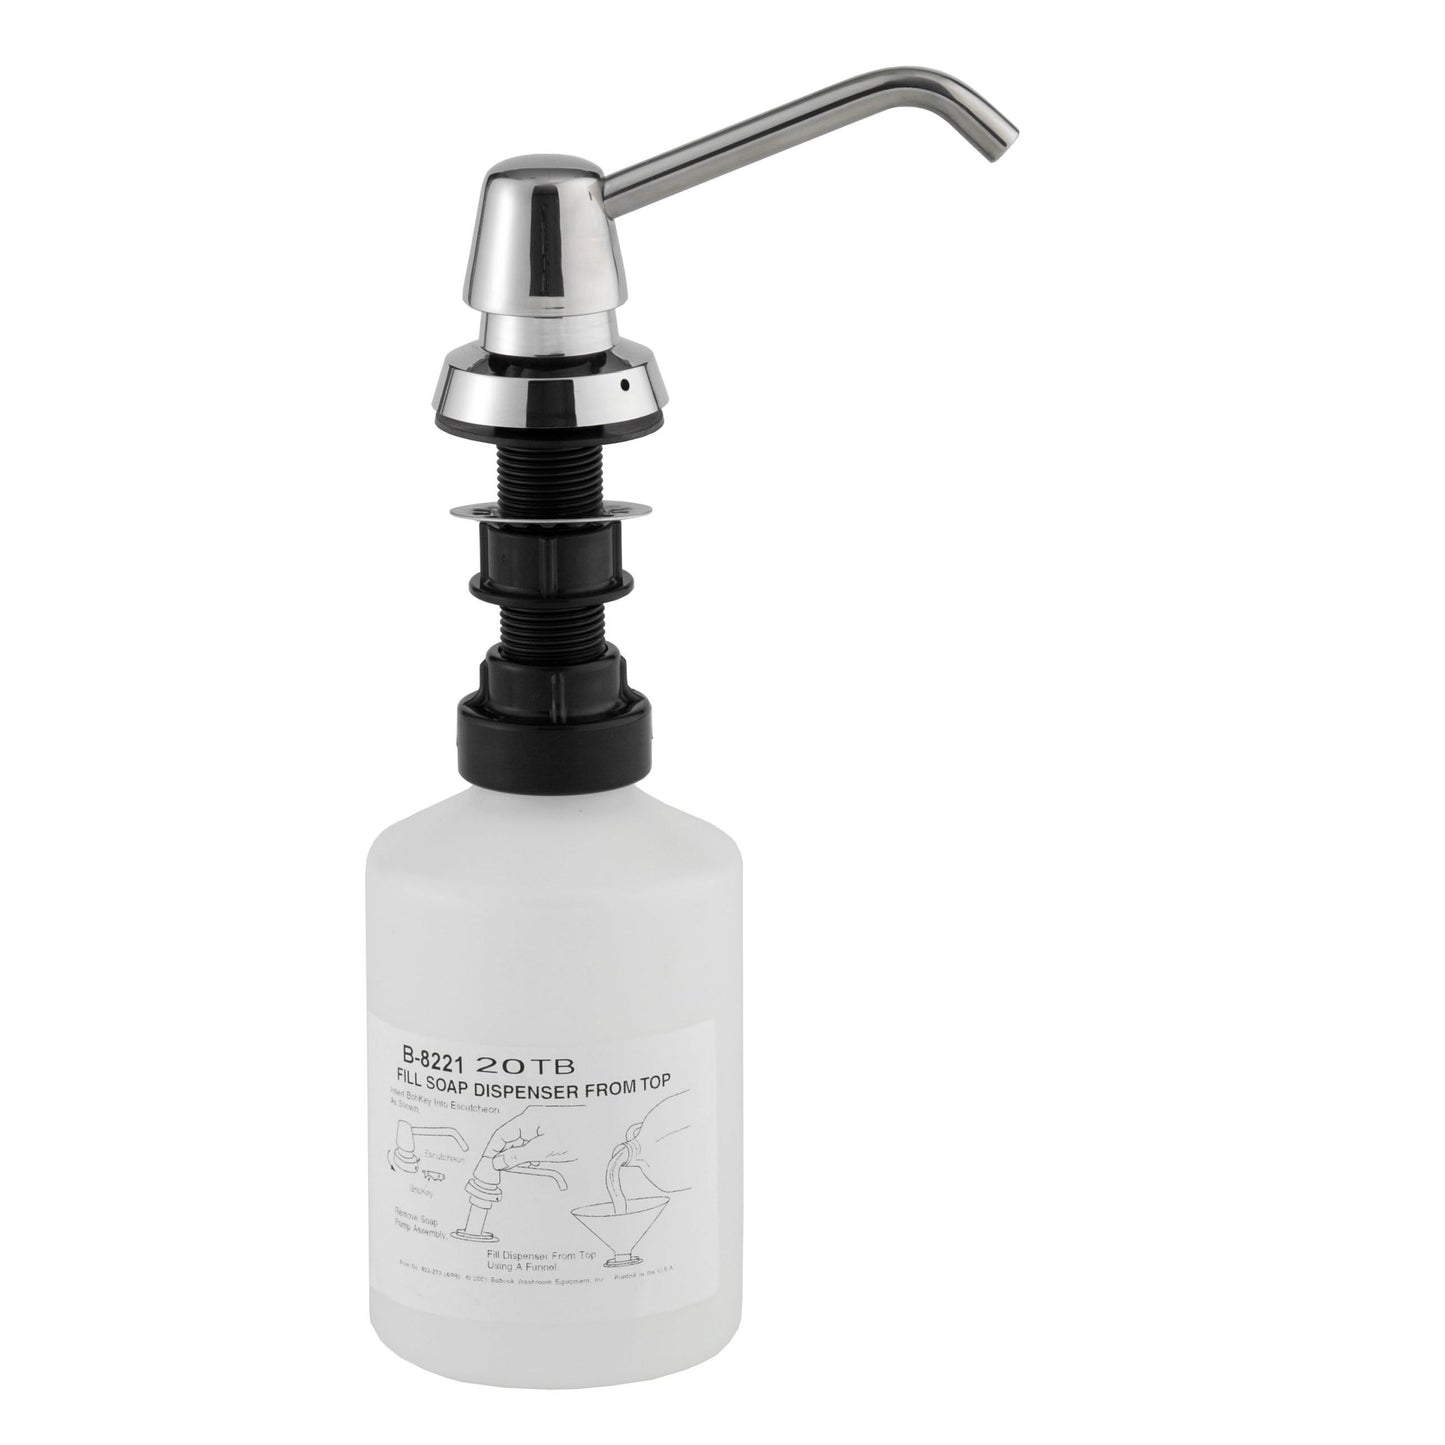 Bobrick 8221 - 4" Spout, Top-Fill 20oz. Manual Liquid Soap Dispenser in Polished Stainless Steel